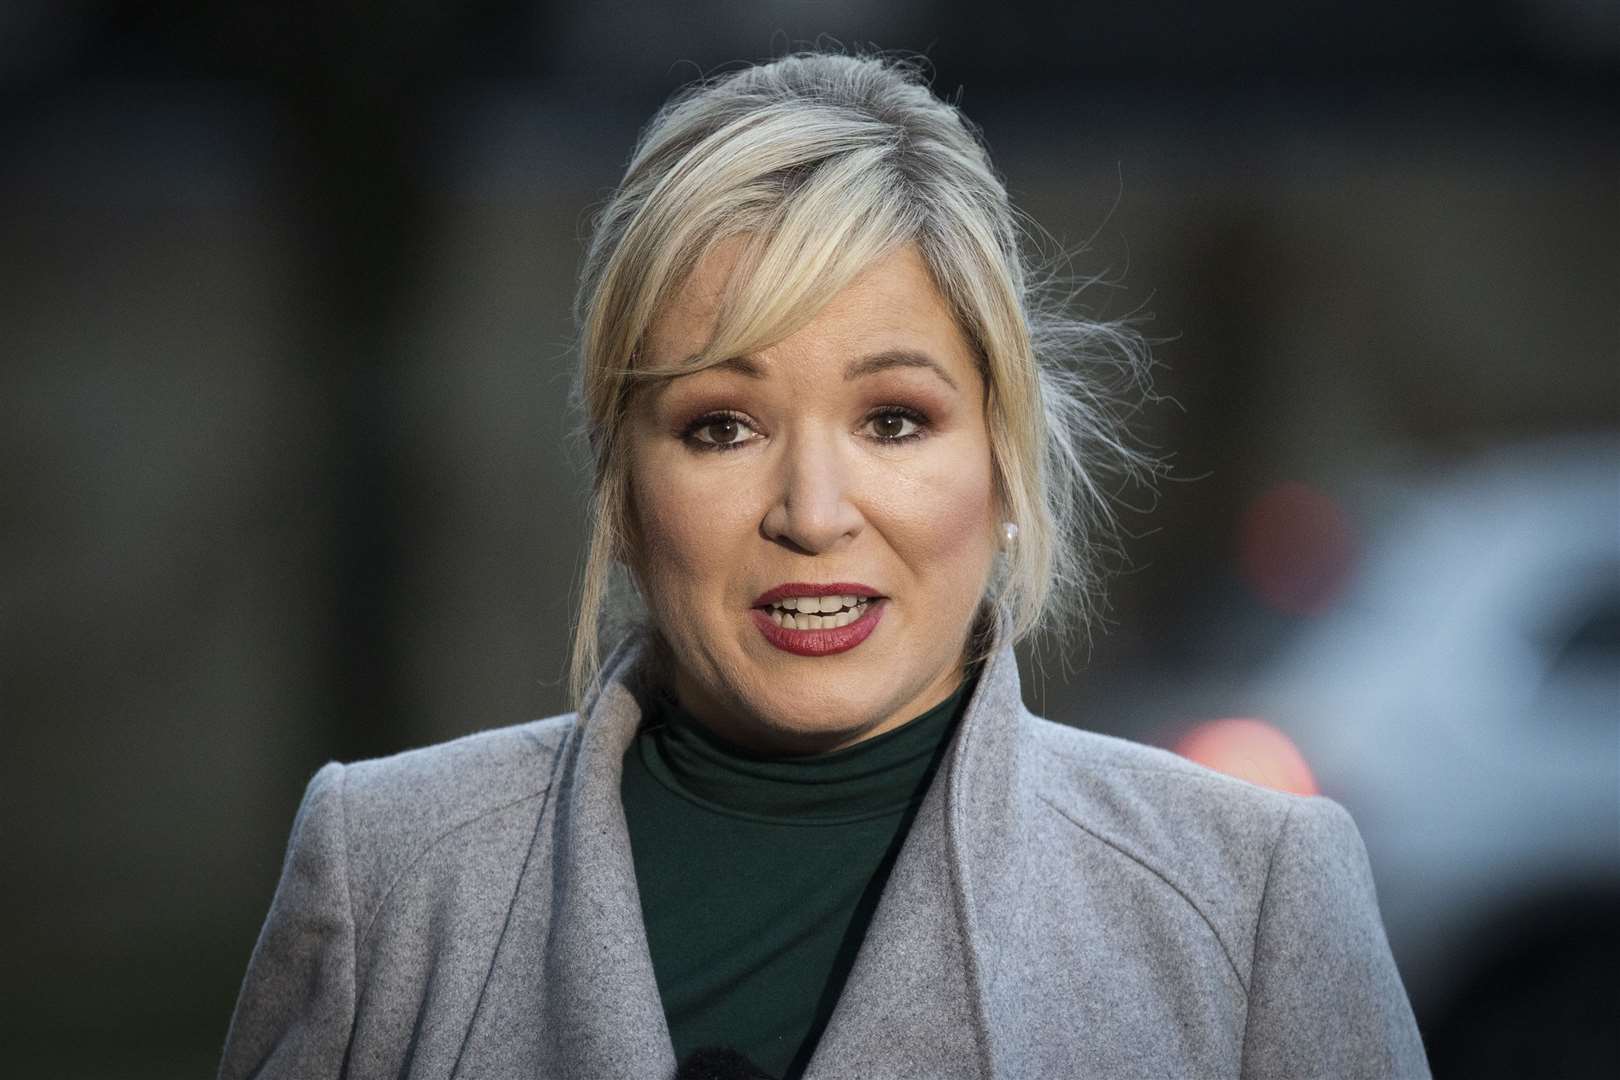 Sinn Fein Vice President Michelle O’Neill called on the DUP to drop its Assembly boycott (Liam McBurney/PA)